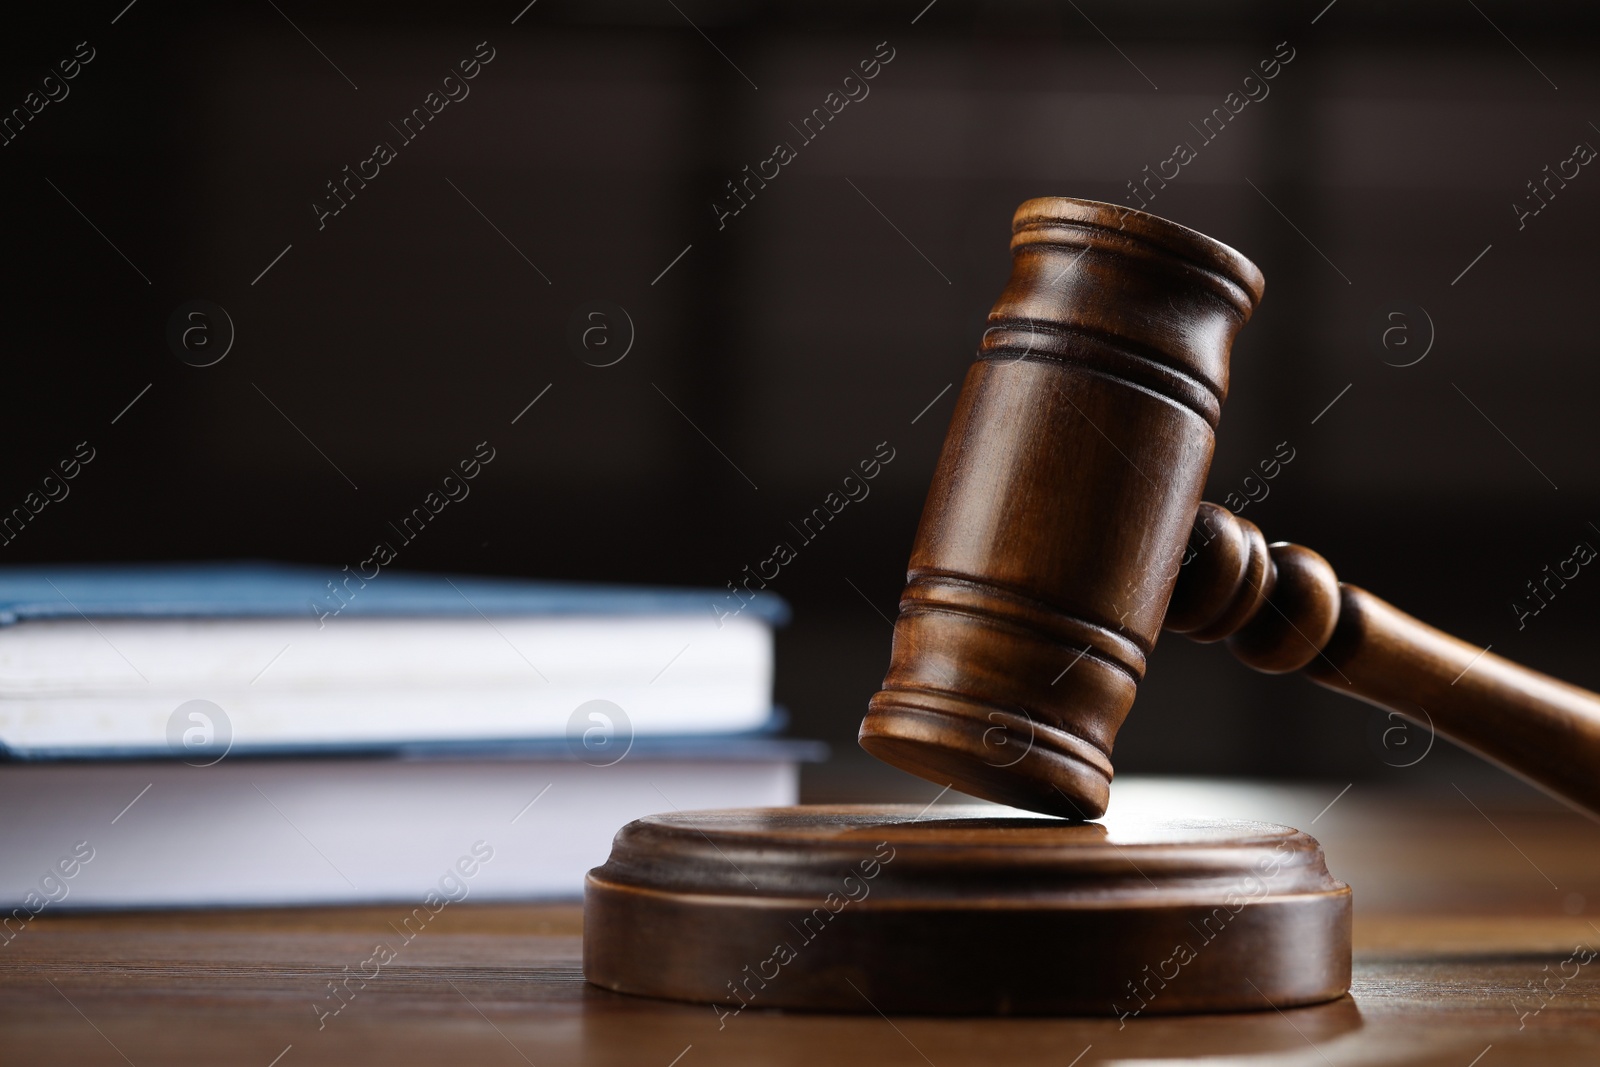 Photo of Wooden gavel and books on table against blurred background, closeup